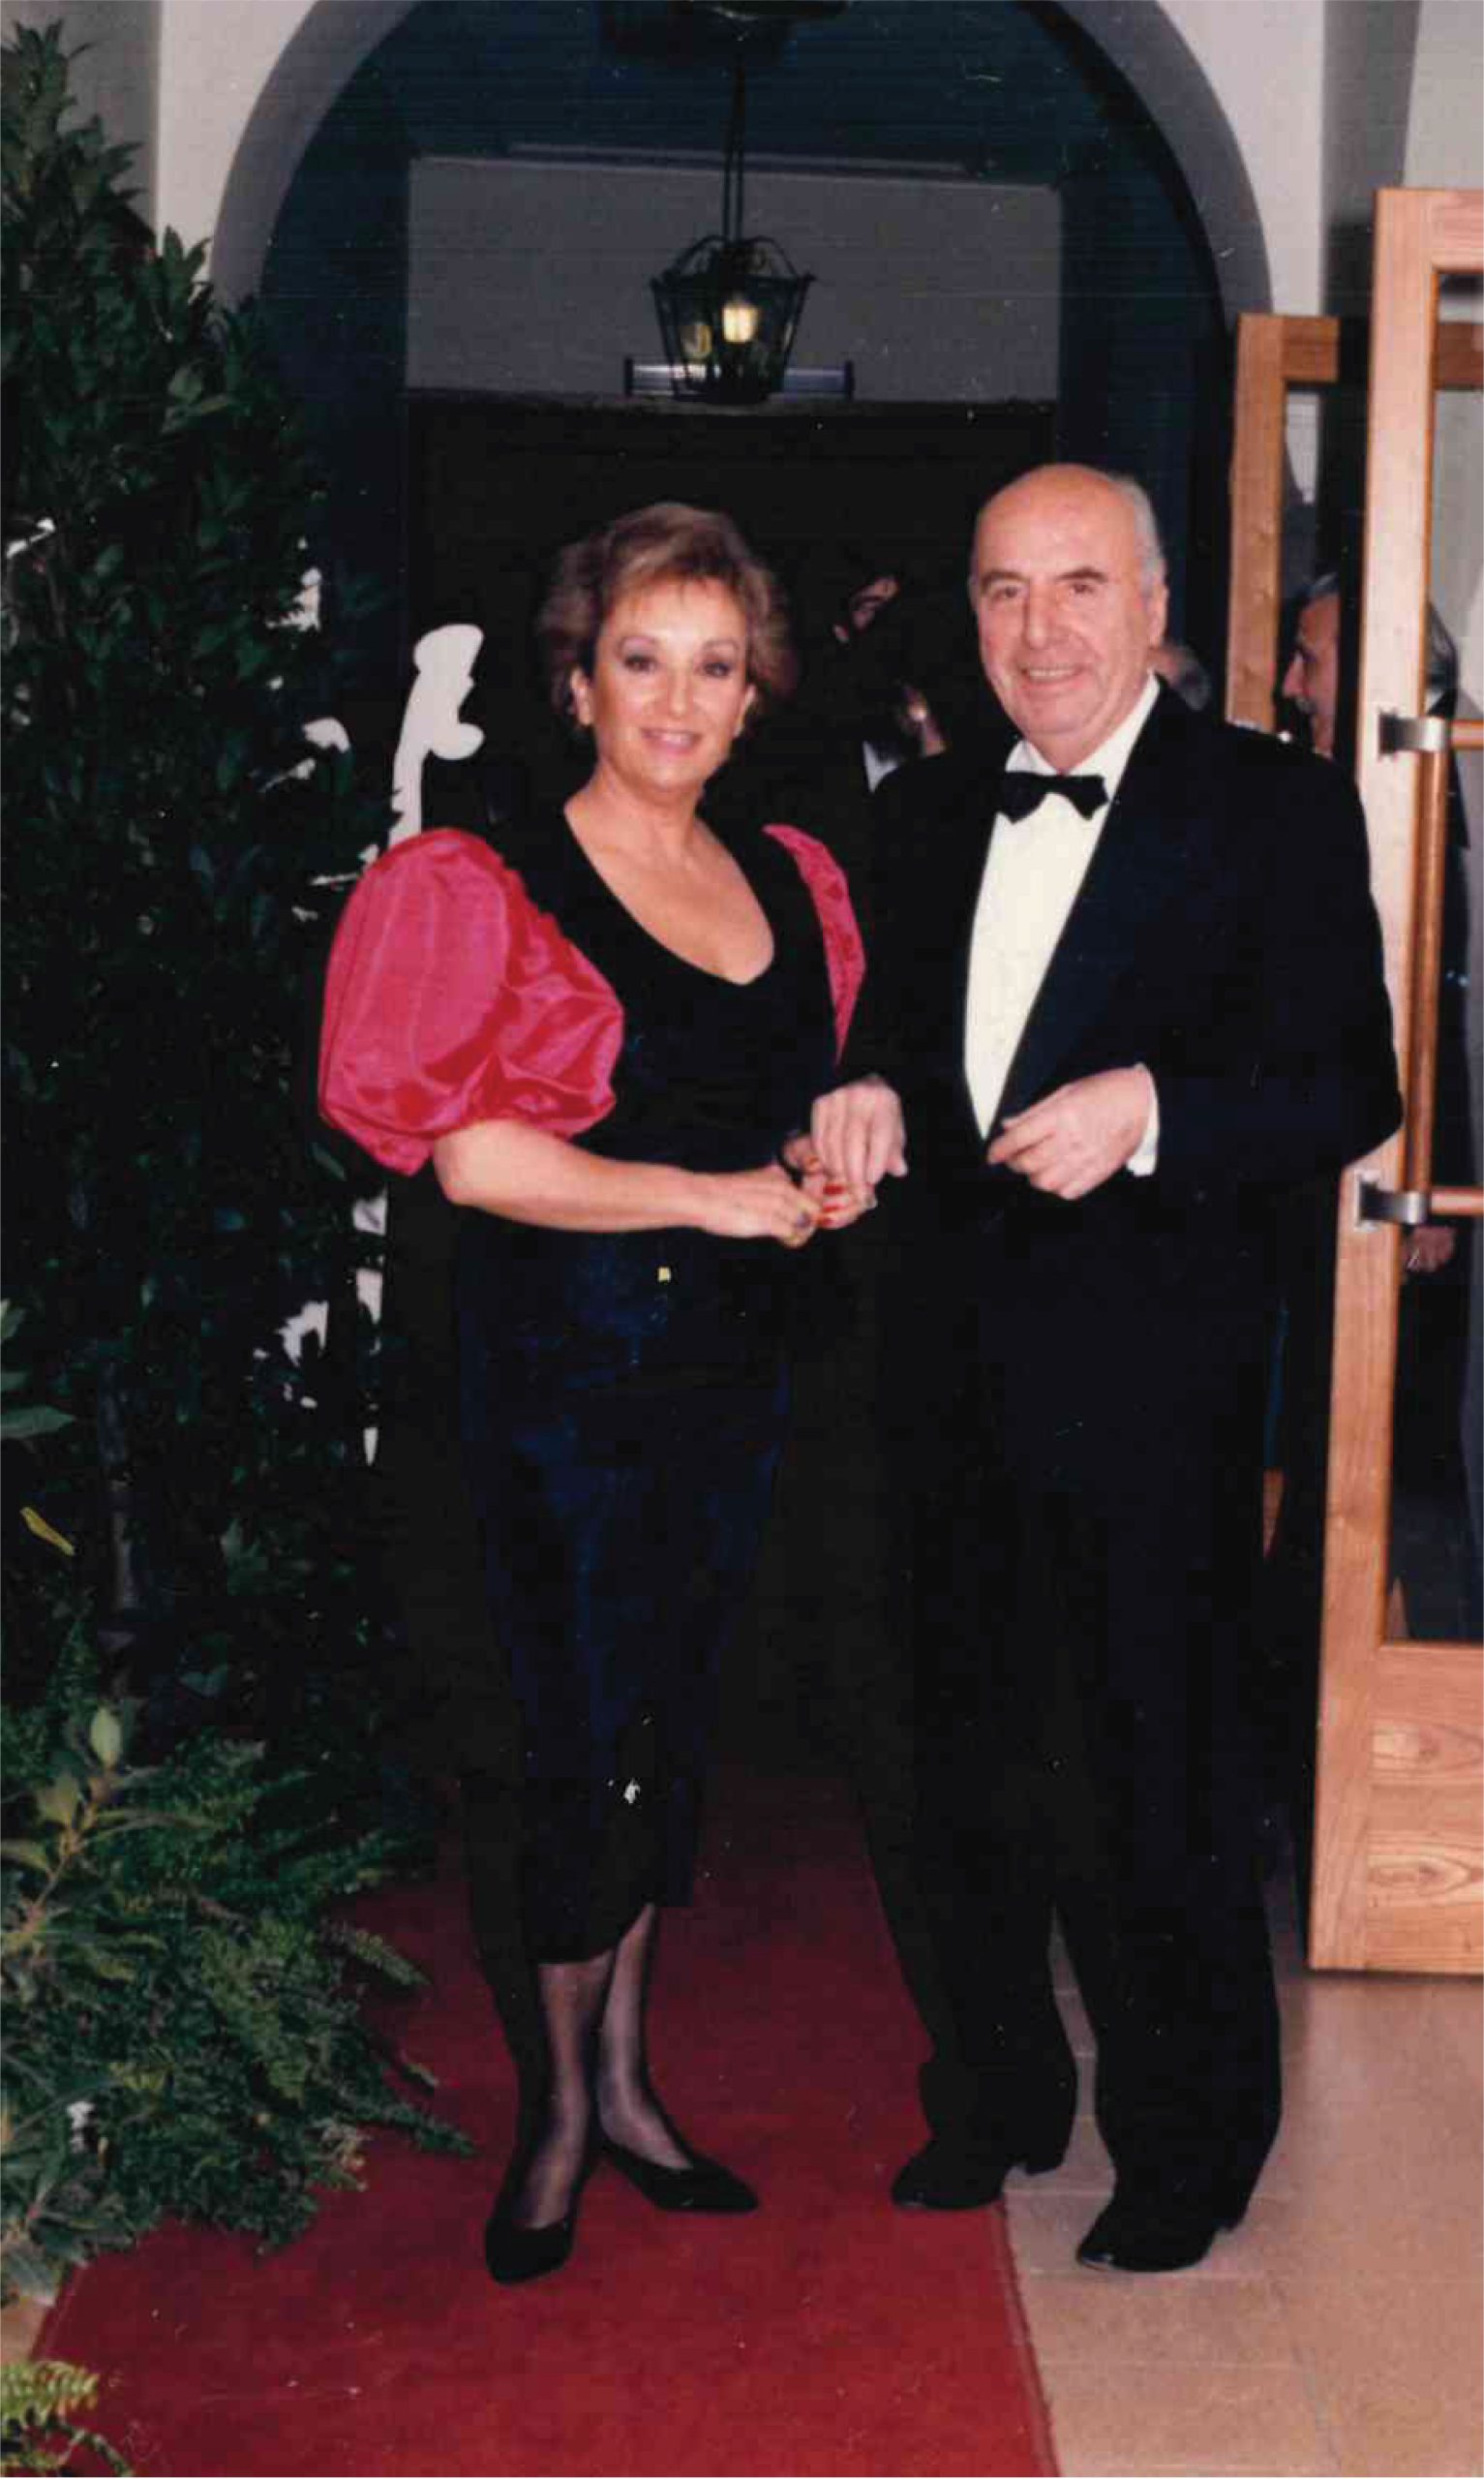 Cesare and his wife at a gala event